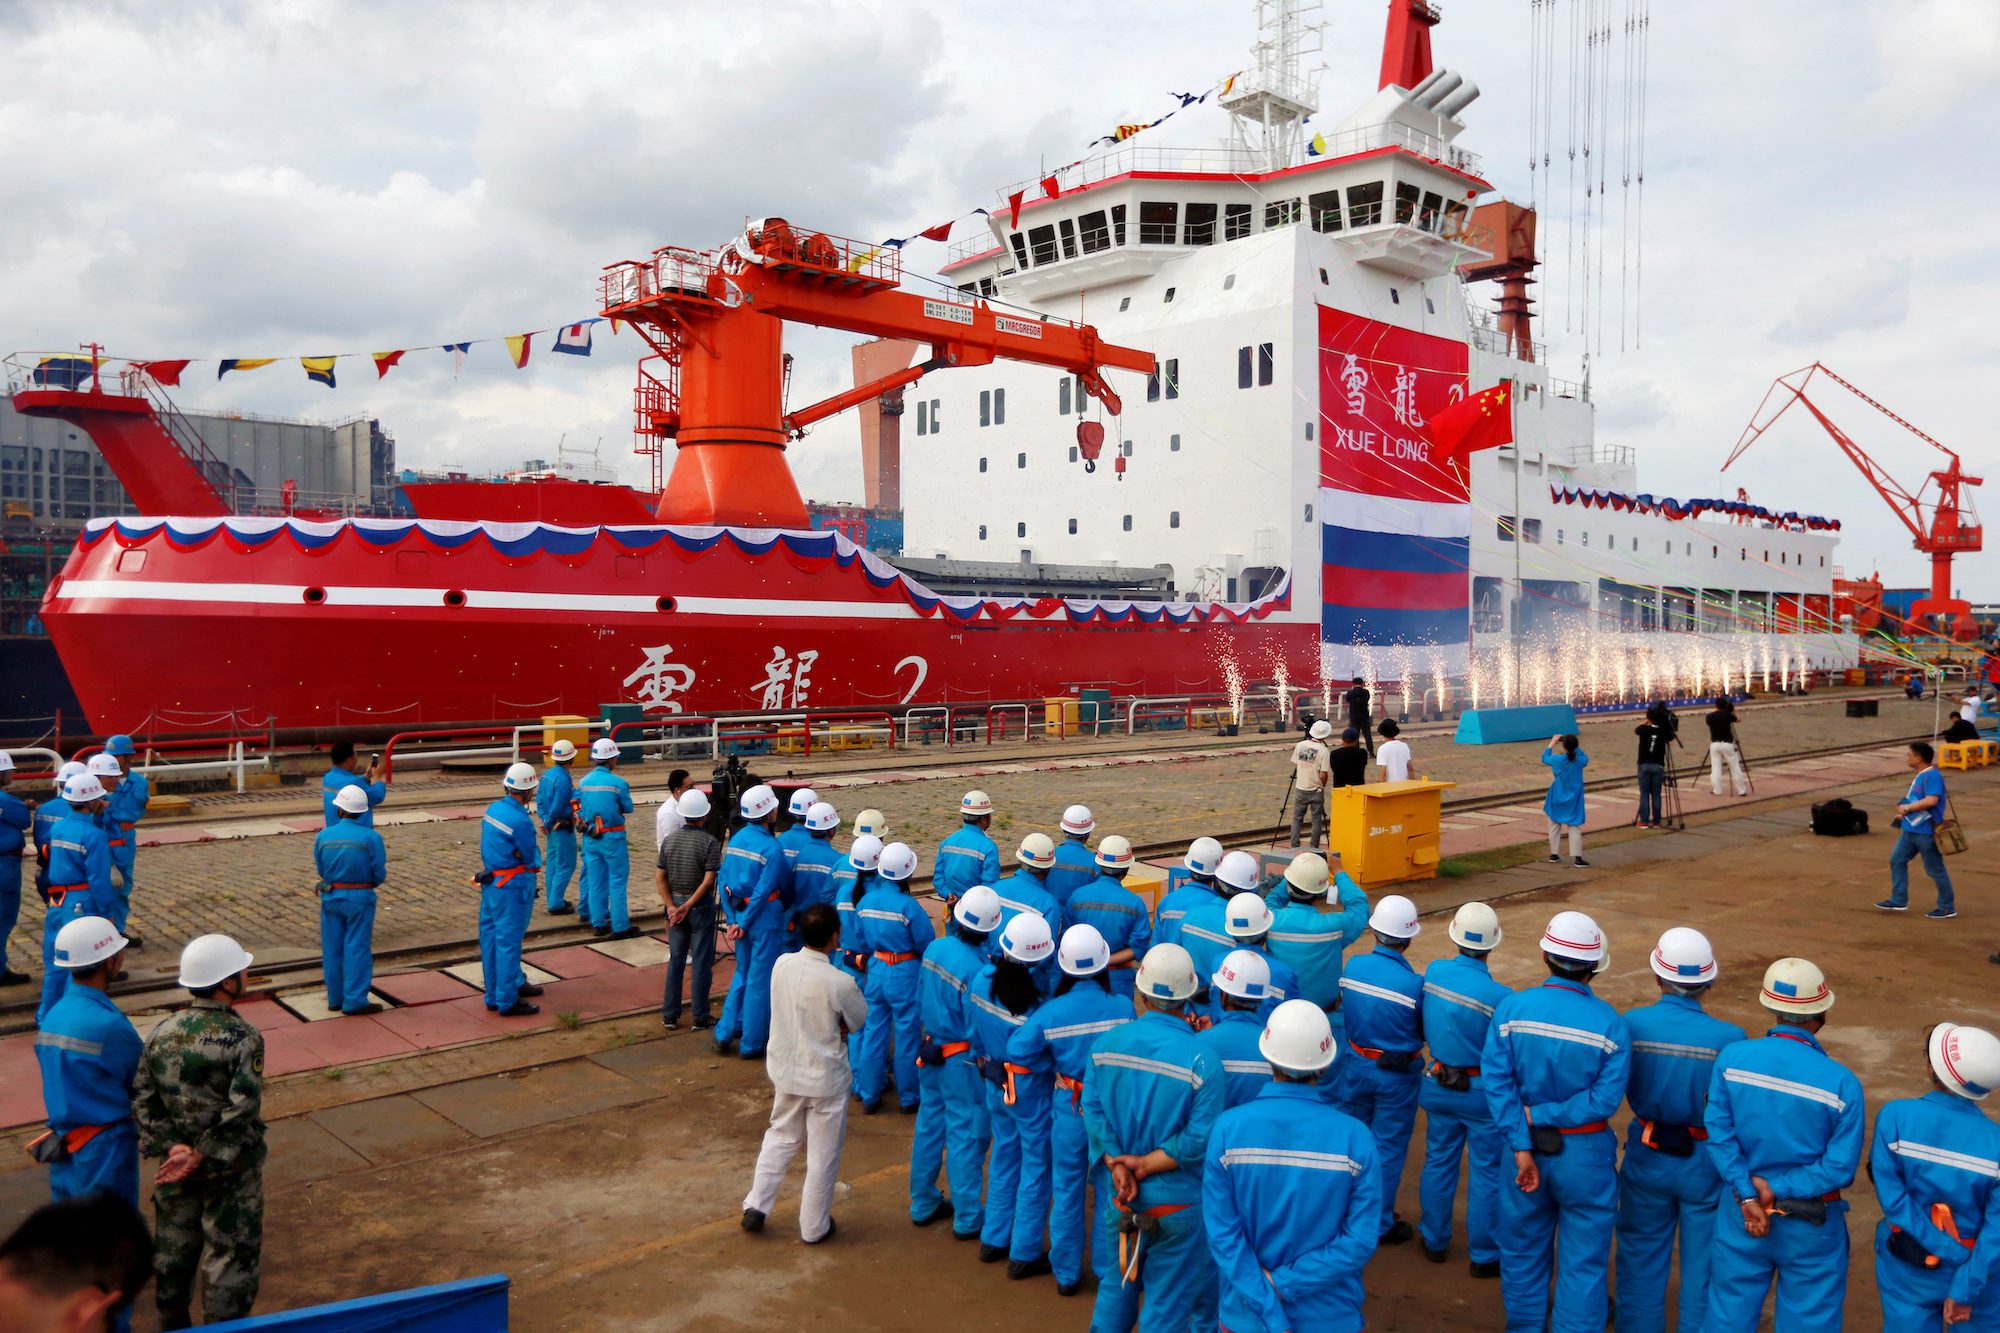 FILE PHOTO: People attend the launch ceremony of China's first domestically built polar icebreaker Xuelong 2, or Snow Dragon 2, at a shipyard in Shanghai, China September 10, 2018. Picture taken September 10, 2018. REUTERS/Stringer